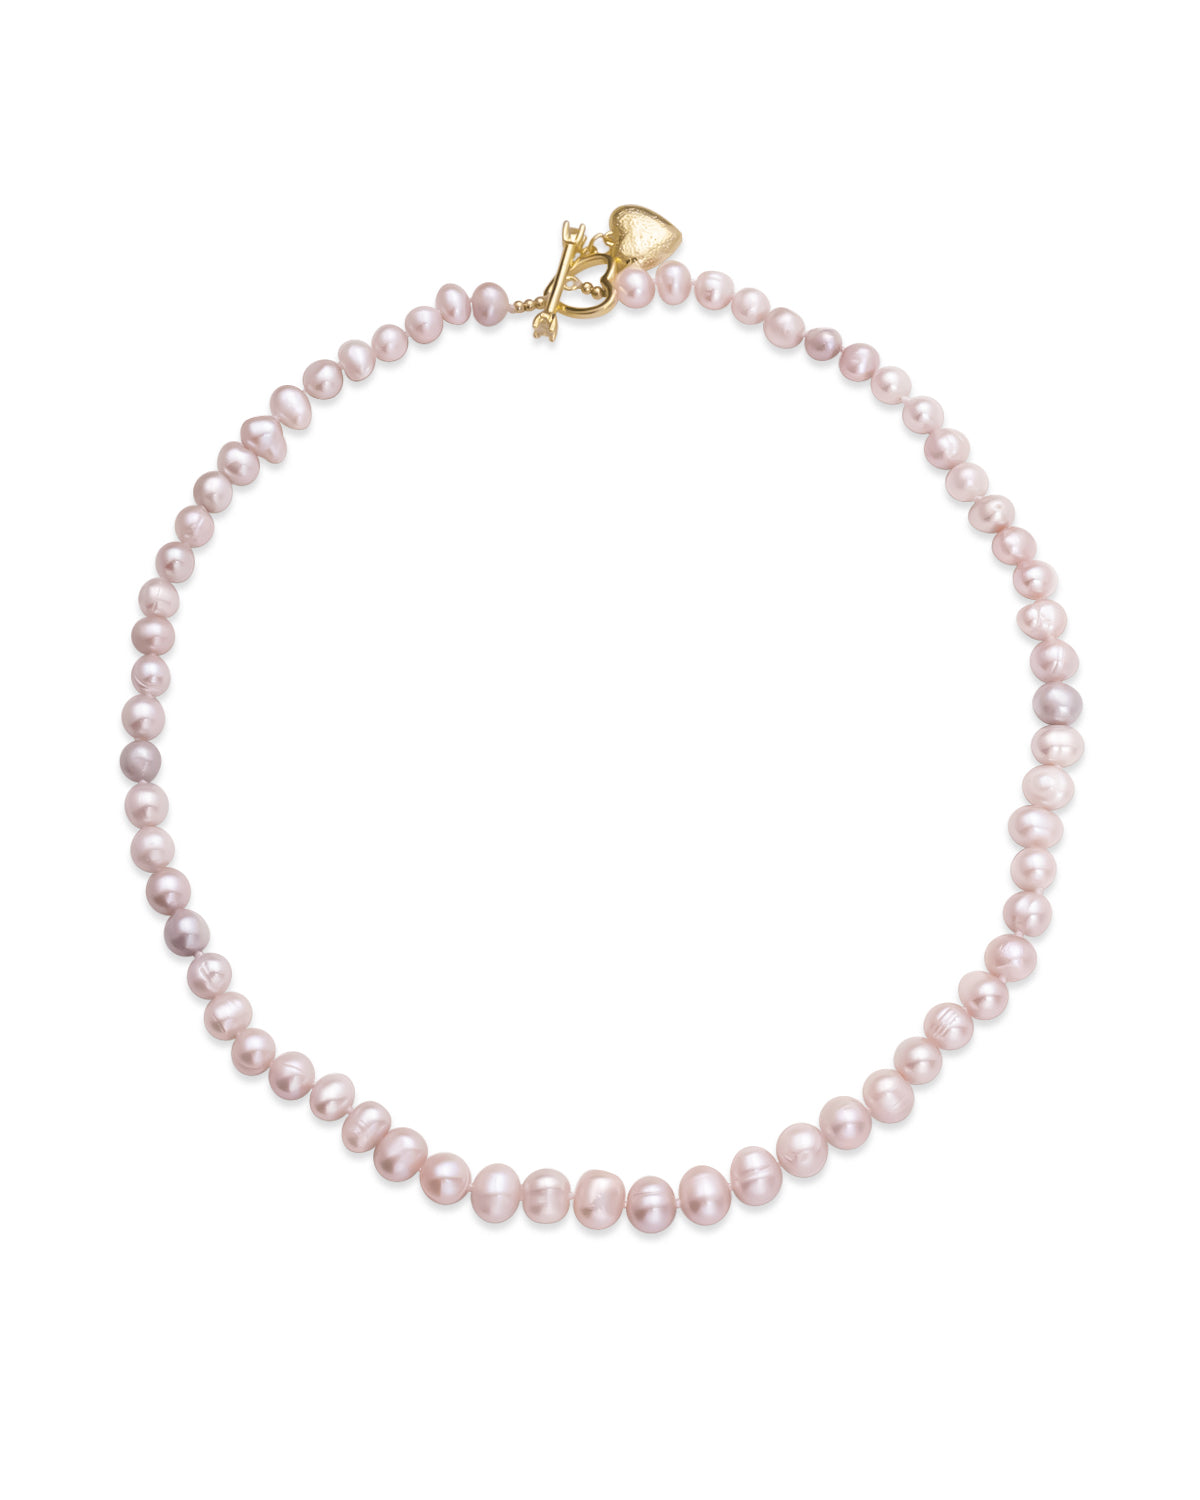 5-6mm Pink Baroque Freshwater Pearl Necklace with Cupid's Arrow Lock